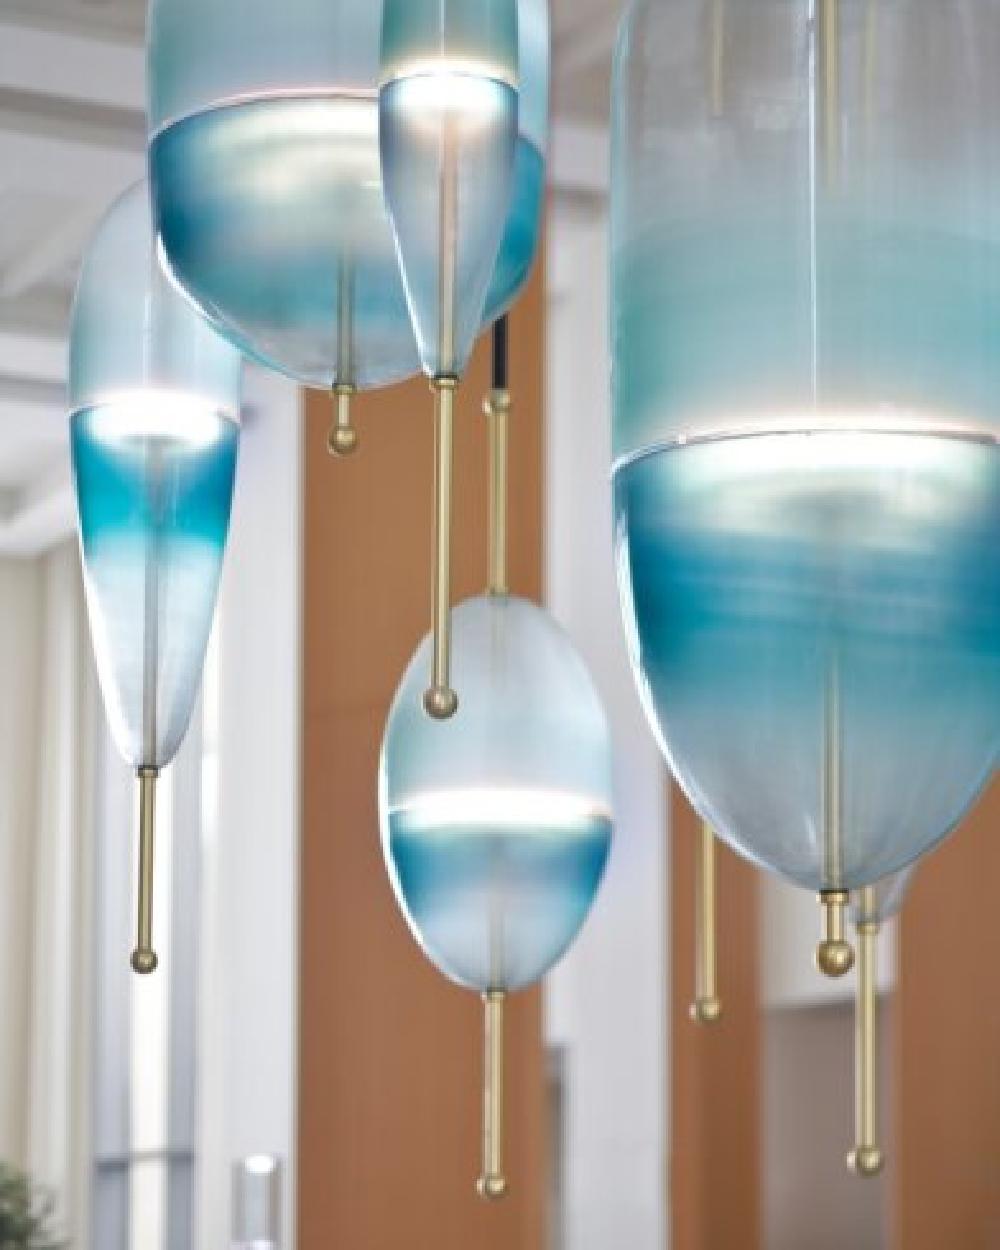 FLOW[T] S7 Pendant lamp in Turquoise by Nao Tamura for Wonderglass For Sale 1